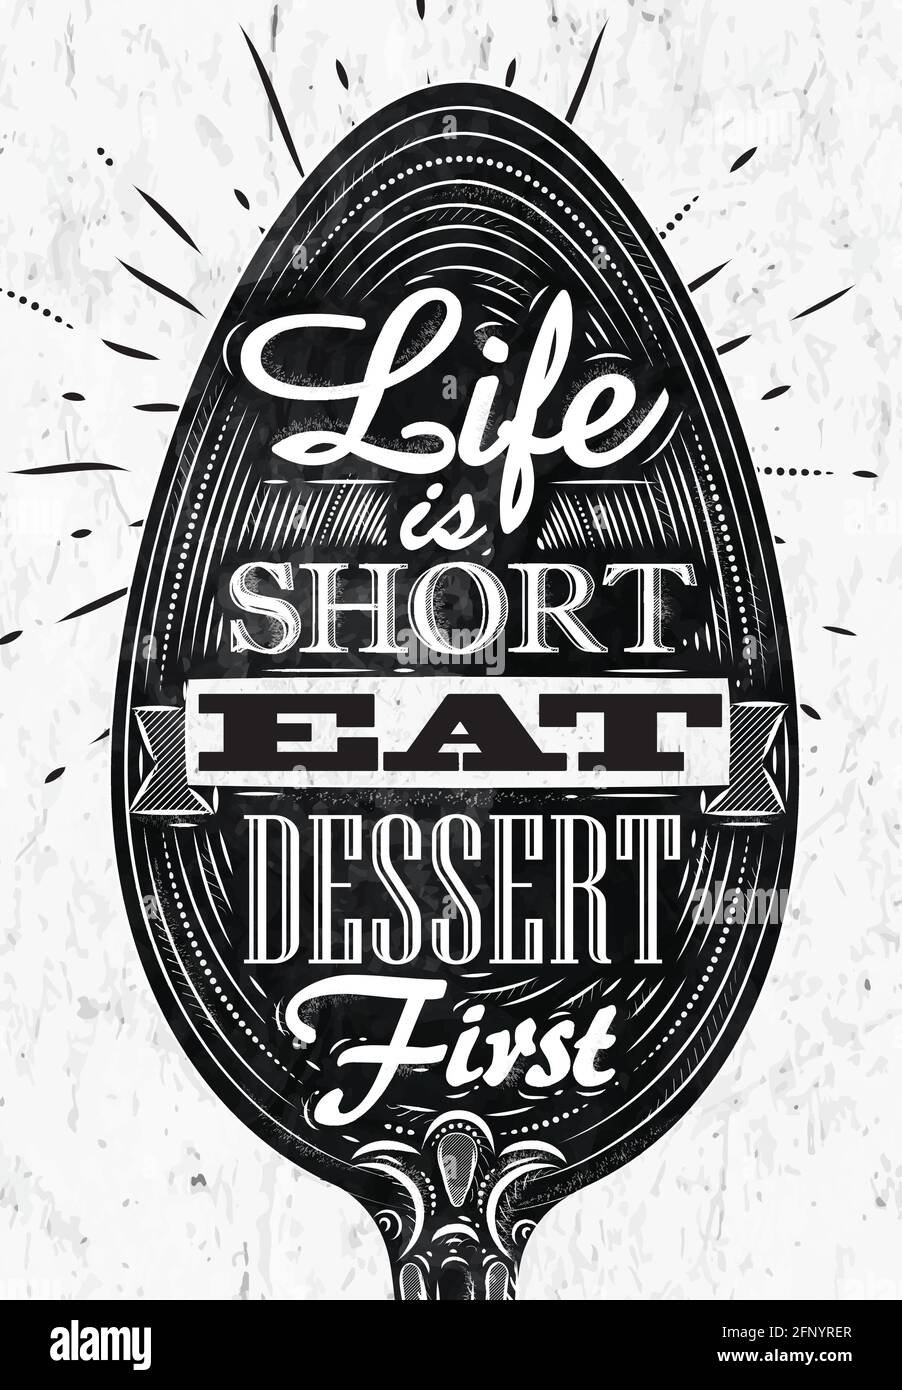 Poster spoon restaurant in retro vintage style lettering life is short eat dessert first in black and white graphics Stock Vector